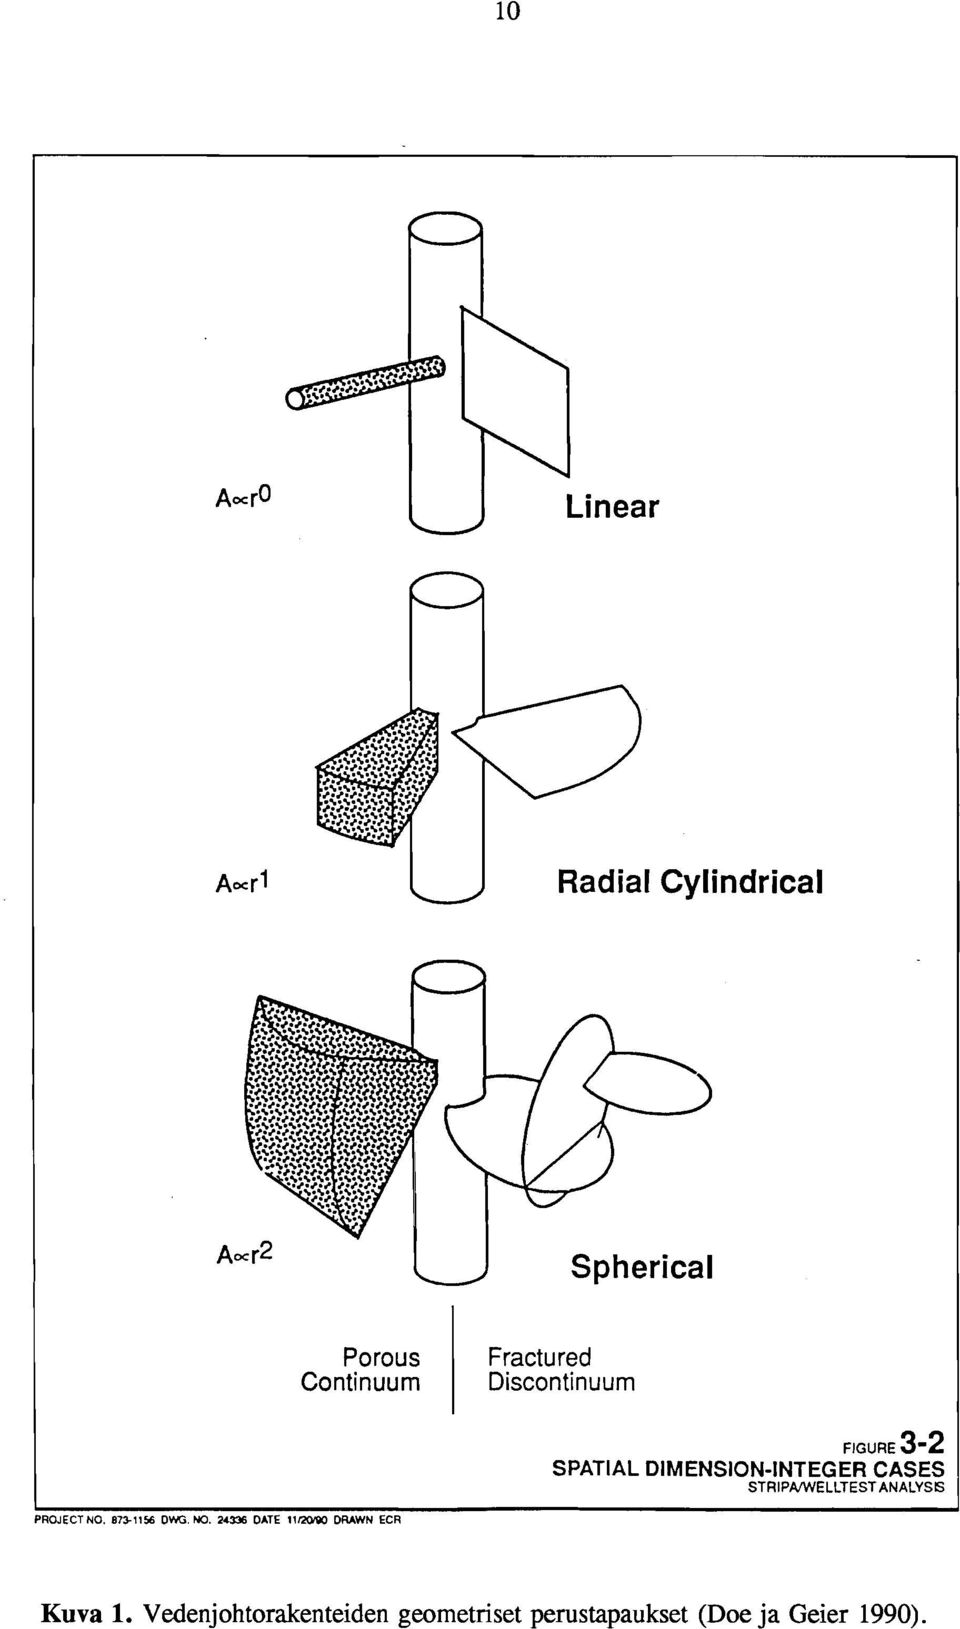 Cylindrical Spherical Porous Continuurn Fractured Discontinuurn FIGURE~-2 ( SPATIAL